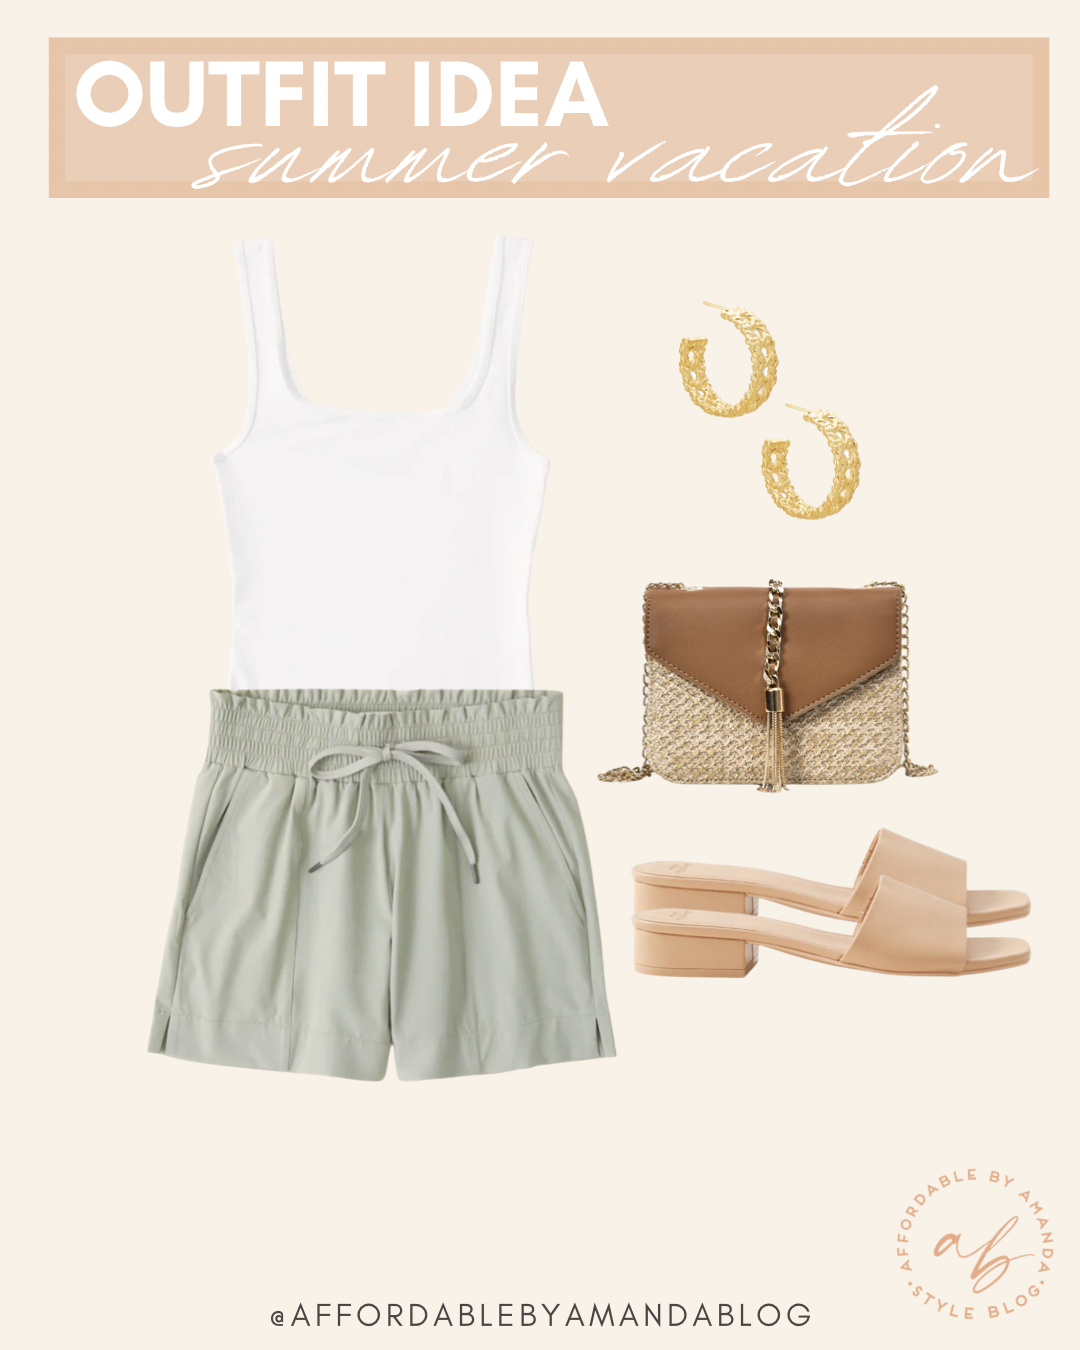 Outfit Idea - Summer Vacation - What To Wear In Hot Weather - Summer Outfit Ideas 2021 - Affordable by Amanda